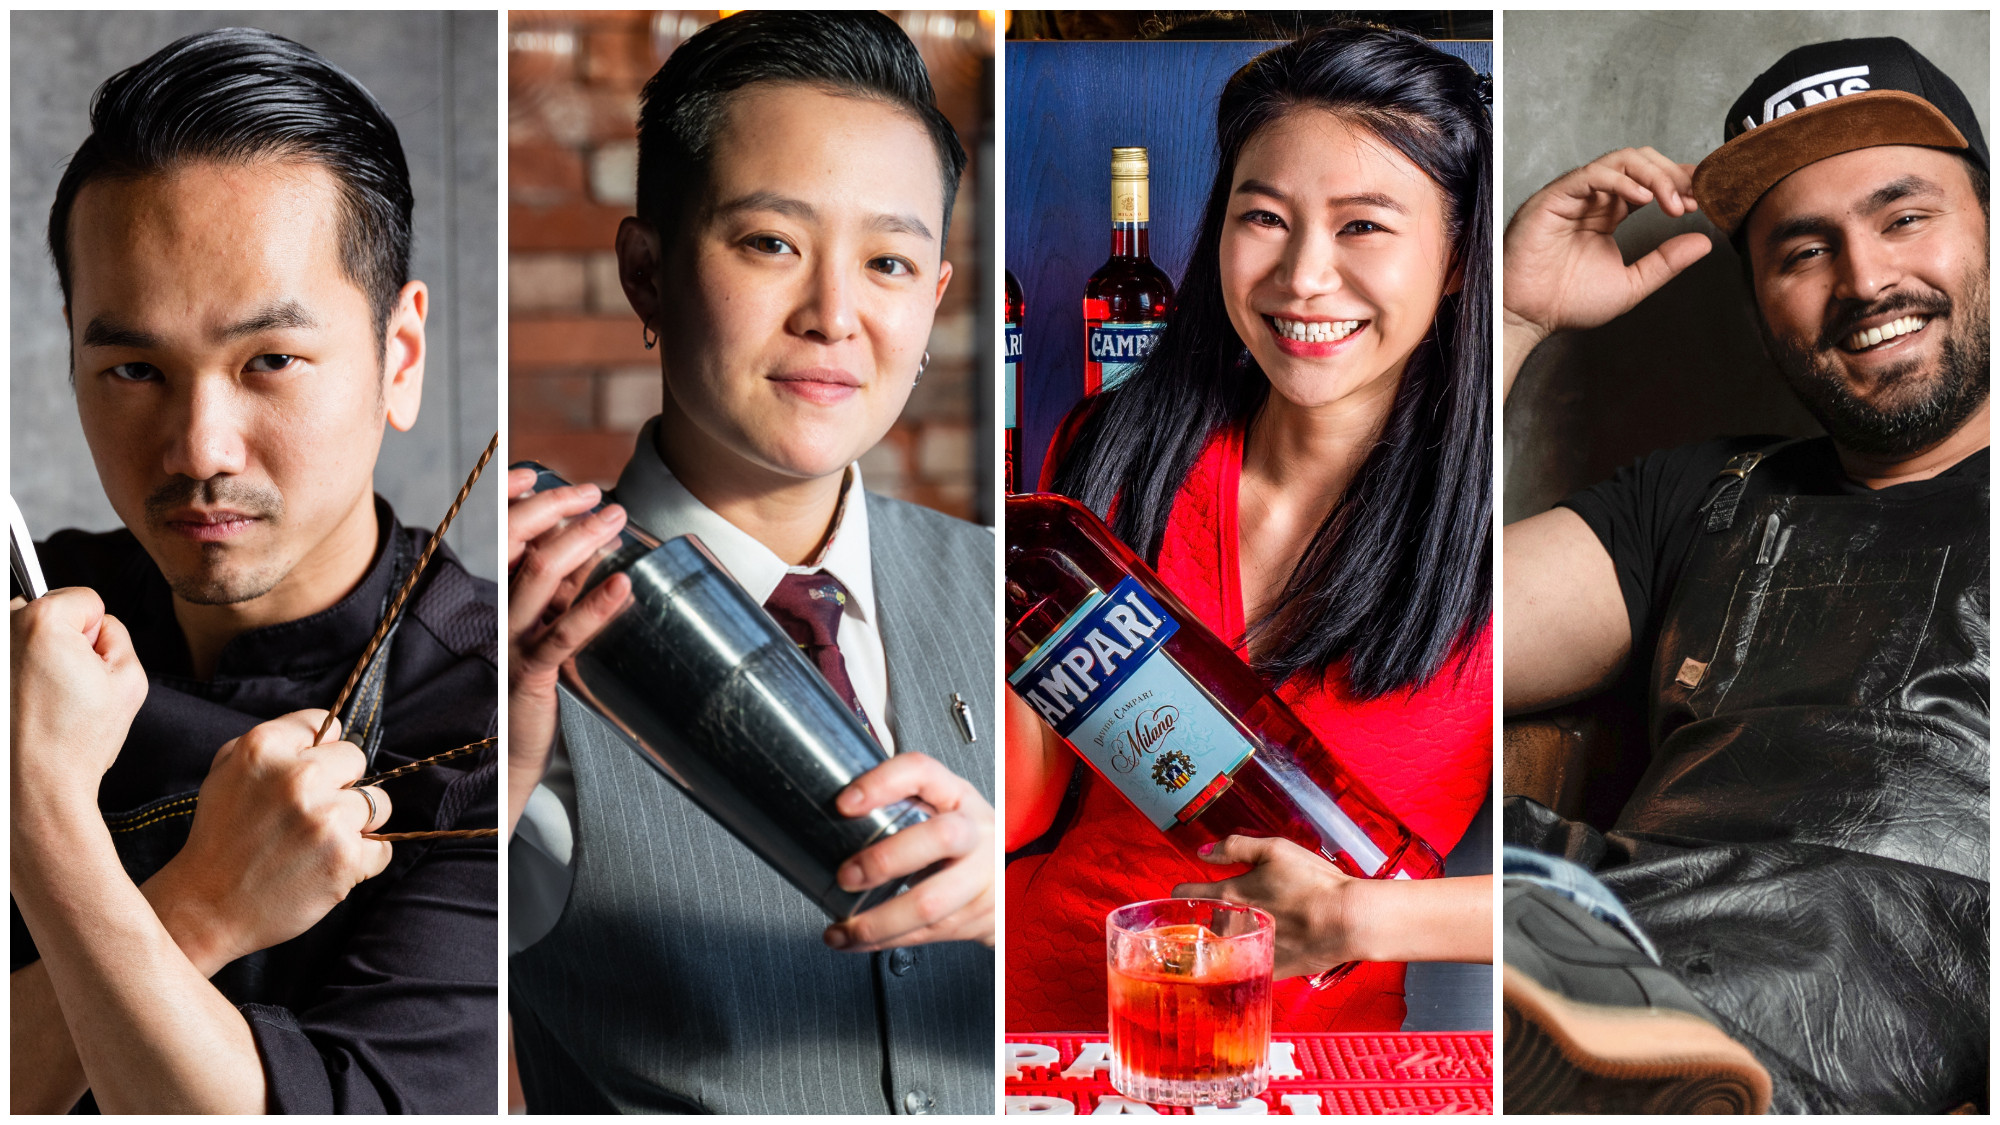 Antonio Lai from Tastings Group; Jo Lo from Room 309 and Envoy; Delphine Kong from Campari Group; Jay Khan from Coa and more on 2022 for the drinks industry in Hong Kong. Photos: Handout, Coa